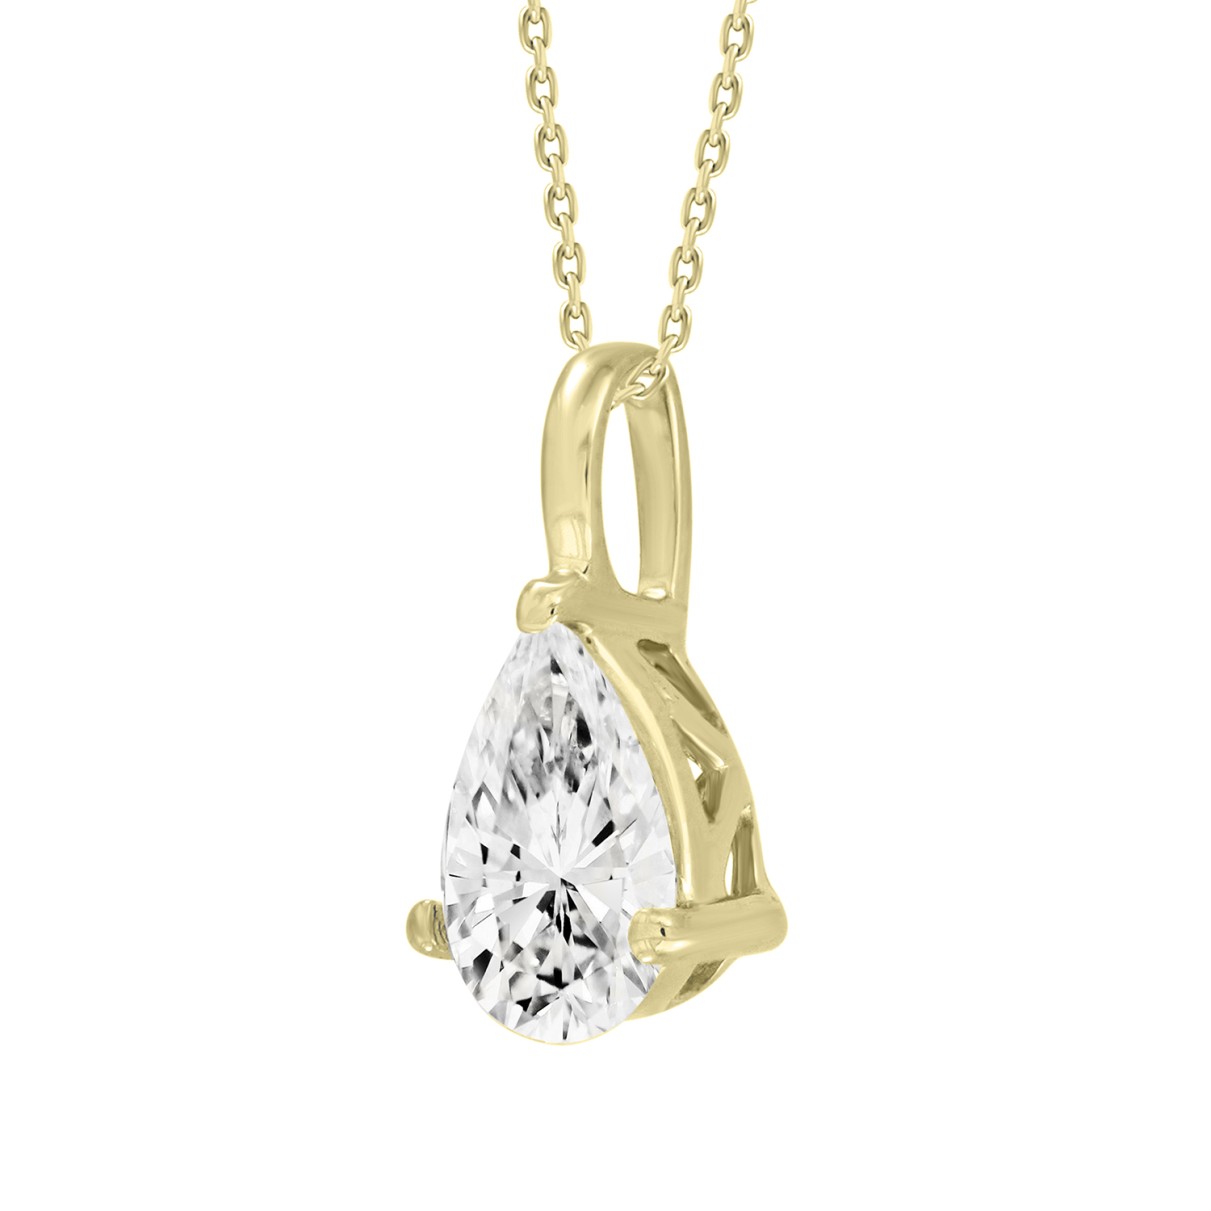 LADIES PENDANT WITH CHAIN 2CT PEAR DIAMOND 14K YELLOW GOLD